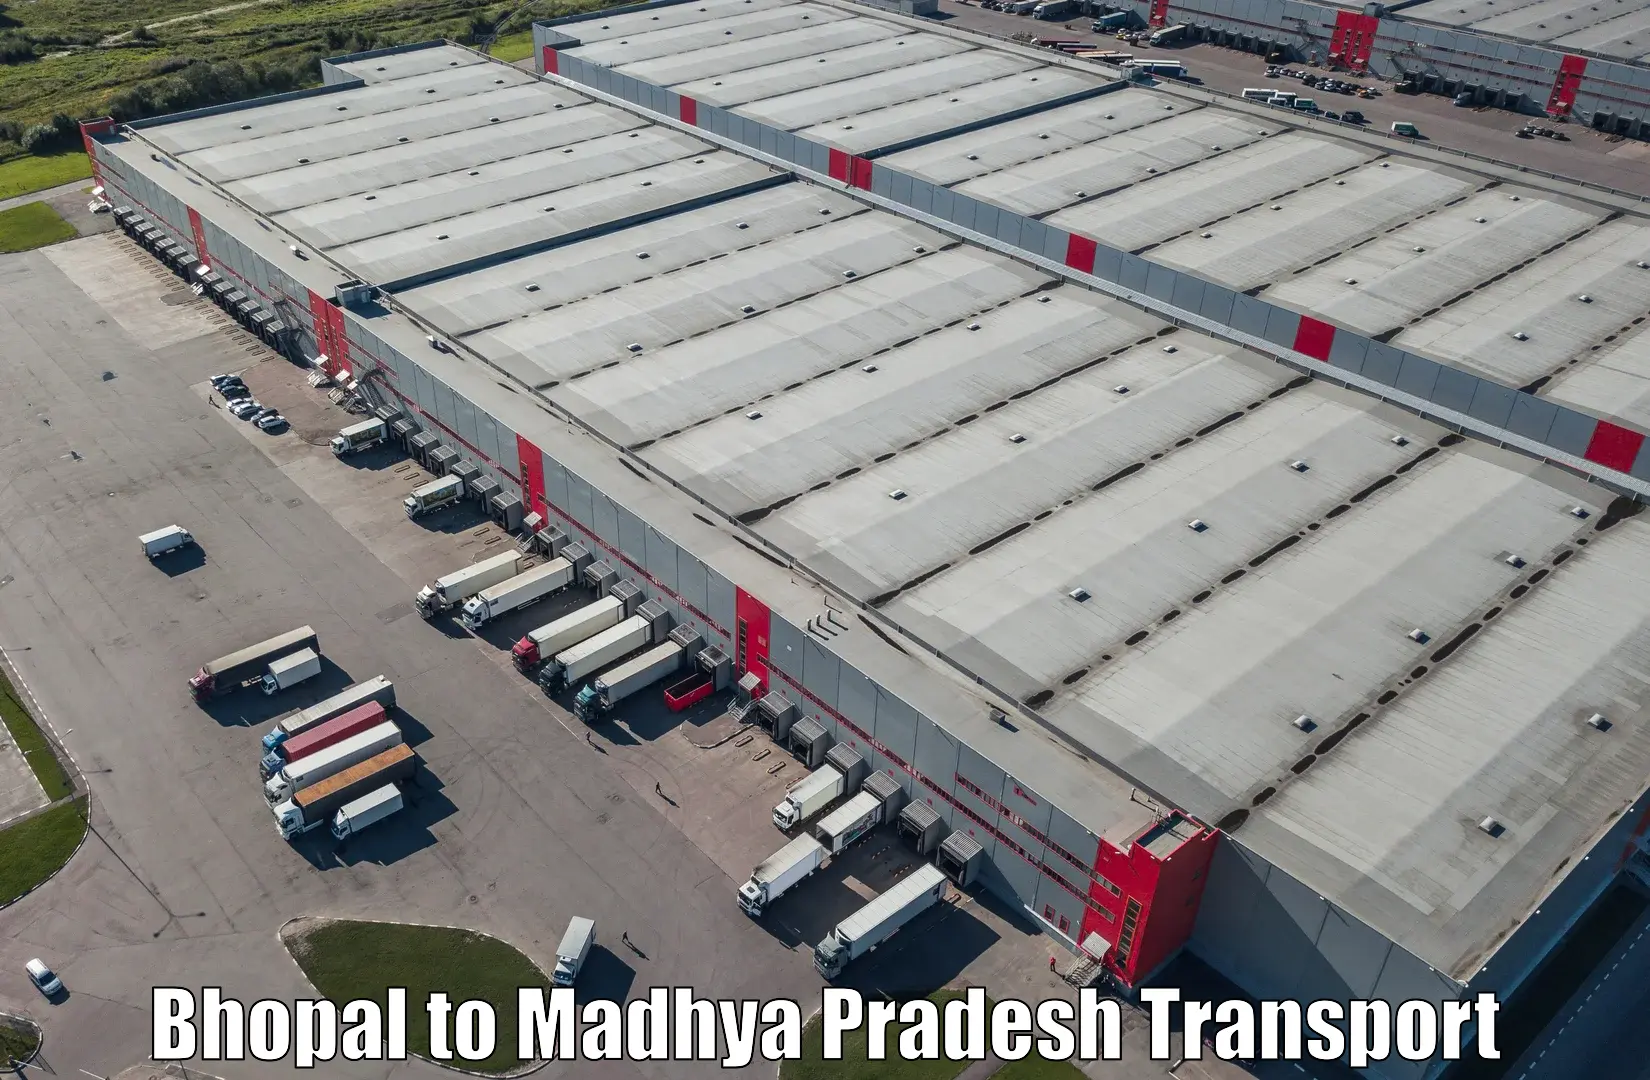 Parcel transport services in Bhopal to Shahpura Dindori